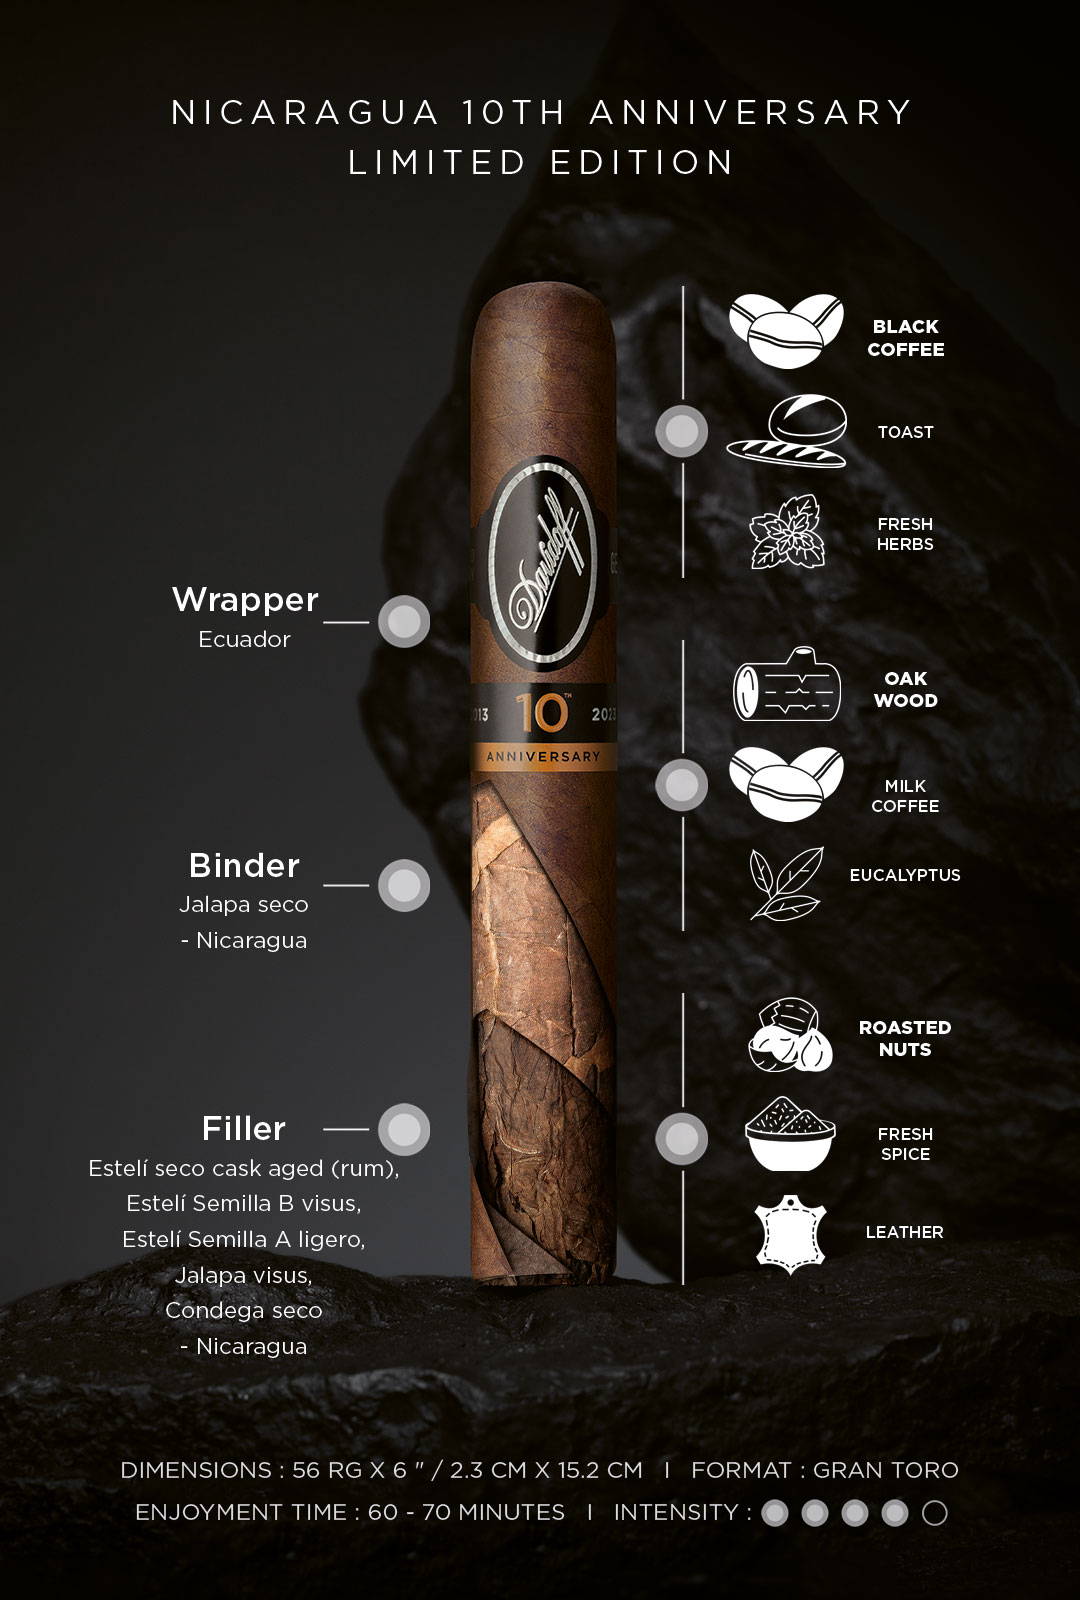 Taste Banner of the Davidoff Nicaragua 10th Anniversary Limited Edition gran toro cigar including aromas, enjoyment time, dimensions, format and intensity.